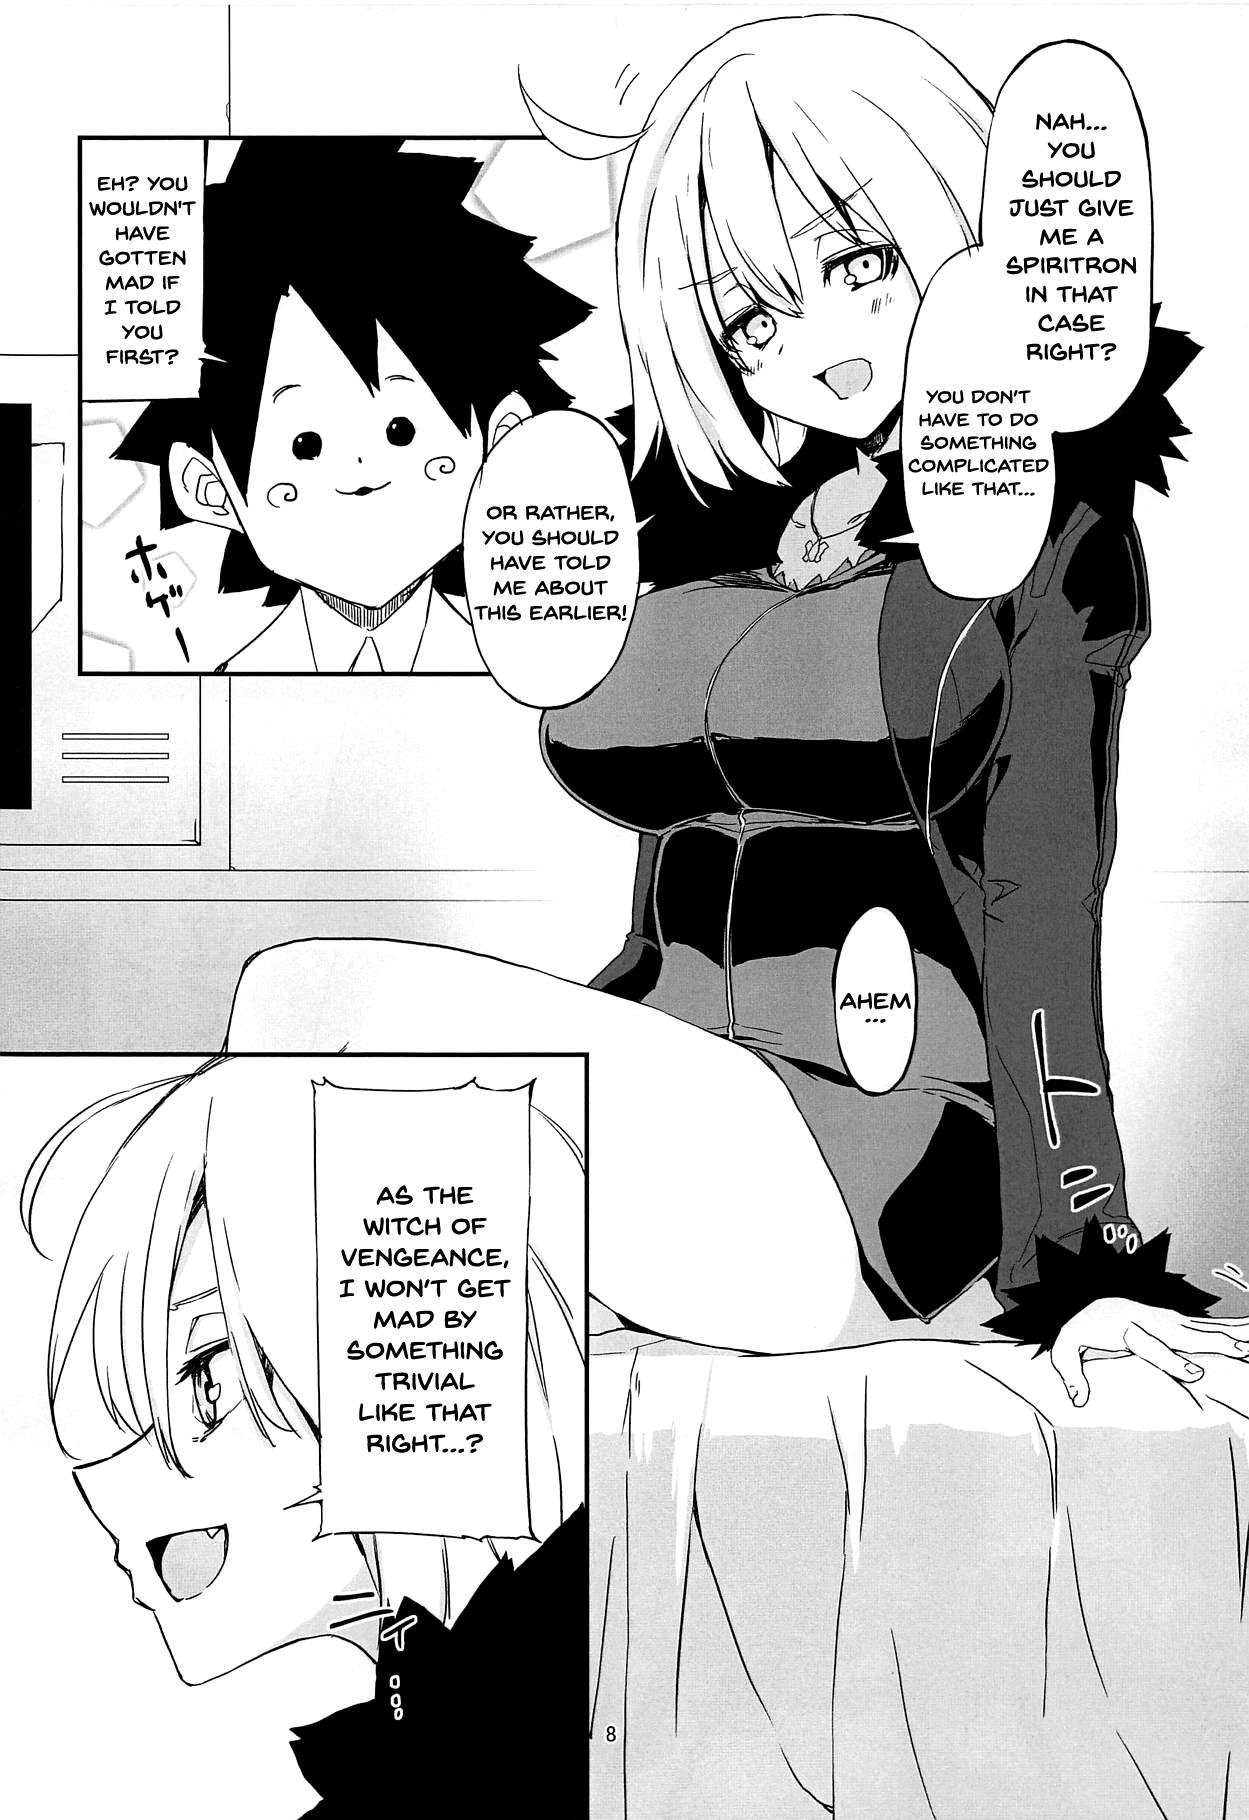 Piercing Uchi no Alter wa Choroi | Our Alter Is So Easy - Fate grand order Amateurs Gone - Page 6